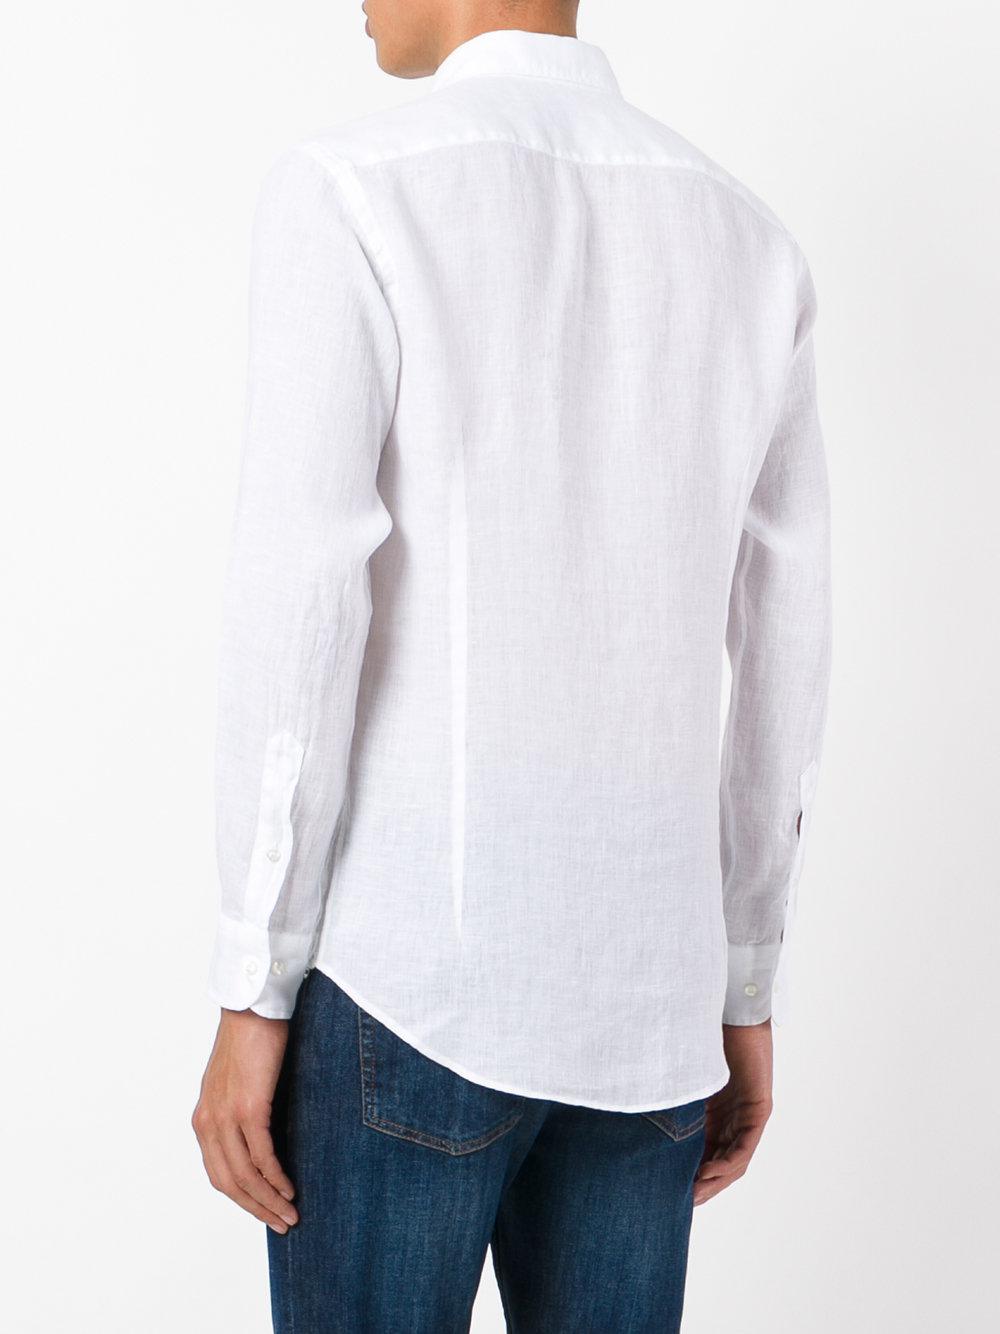 Lyst - Etro Embroidered Logo Shirt in White for Men